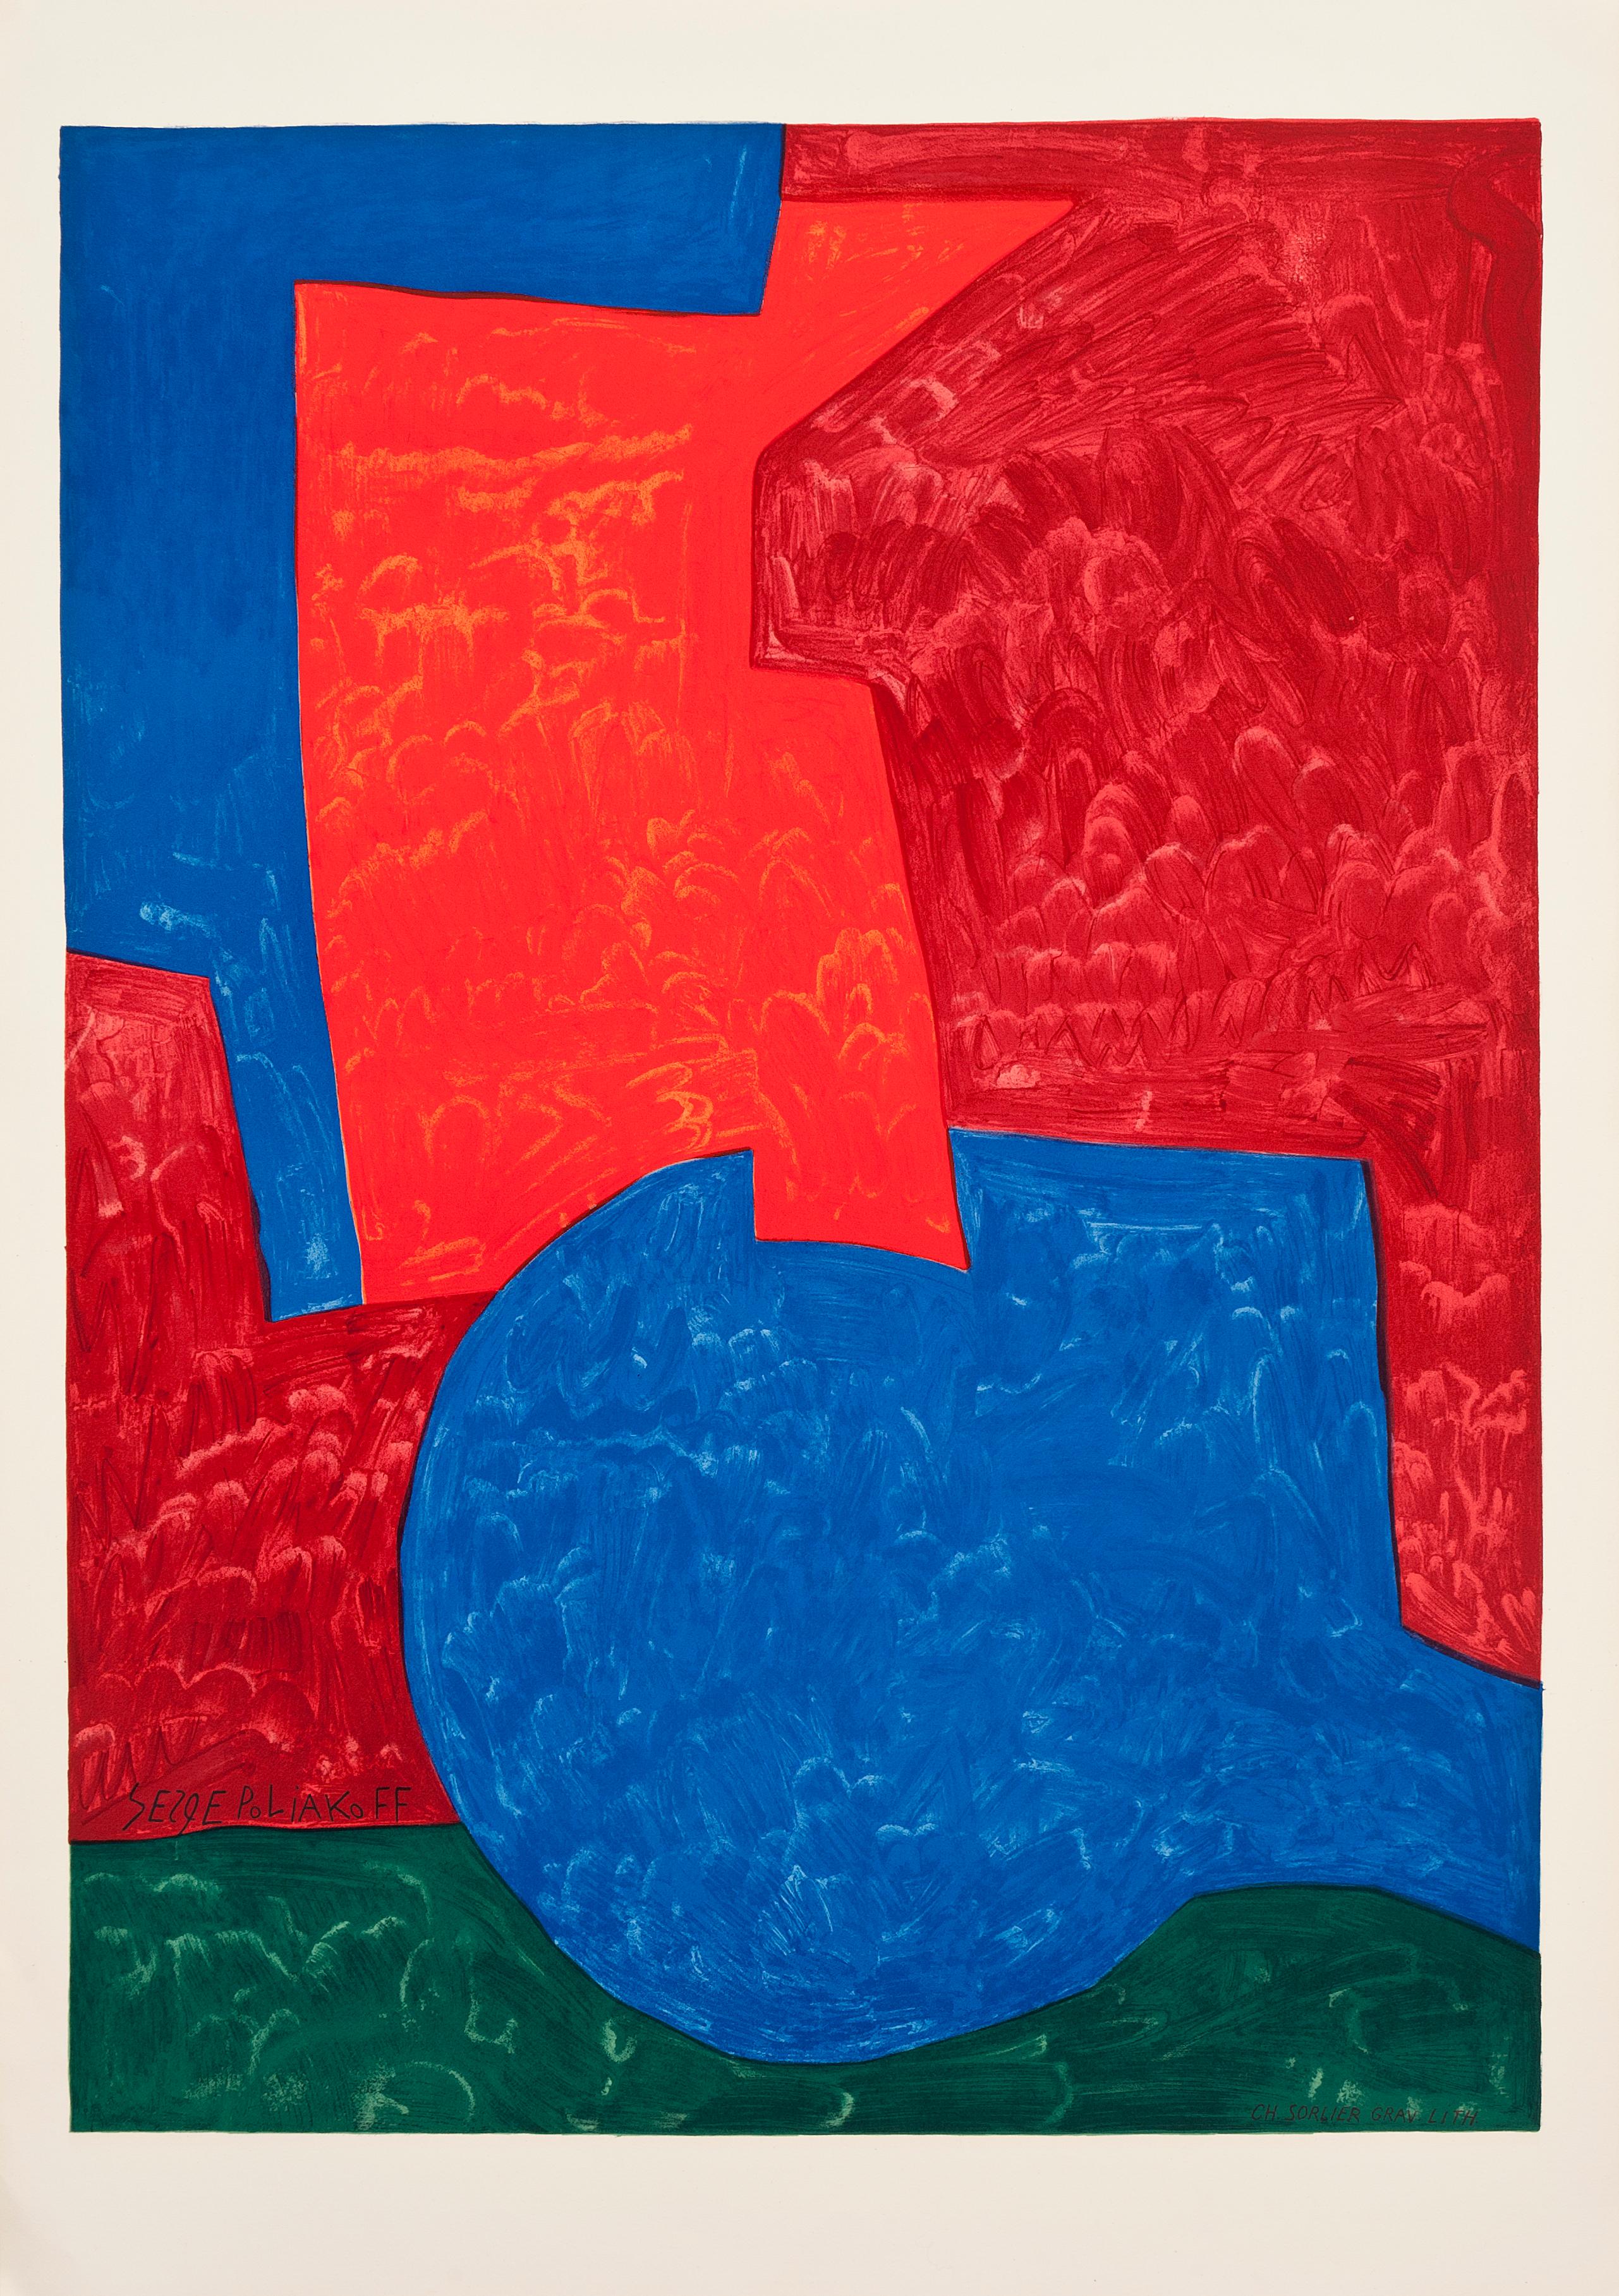 This lithograph was printed in 1965 at the Atelier Mourlot in Paris. This modern print consists of jagged blocks in red, green, blue, and orange. Poliakoff was a part of the "new" Ecole de Paris where he mastered in abstract painting